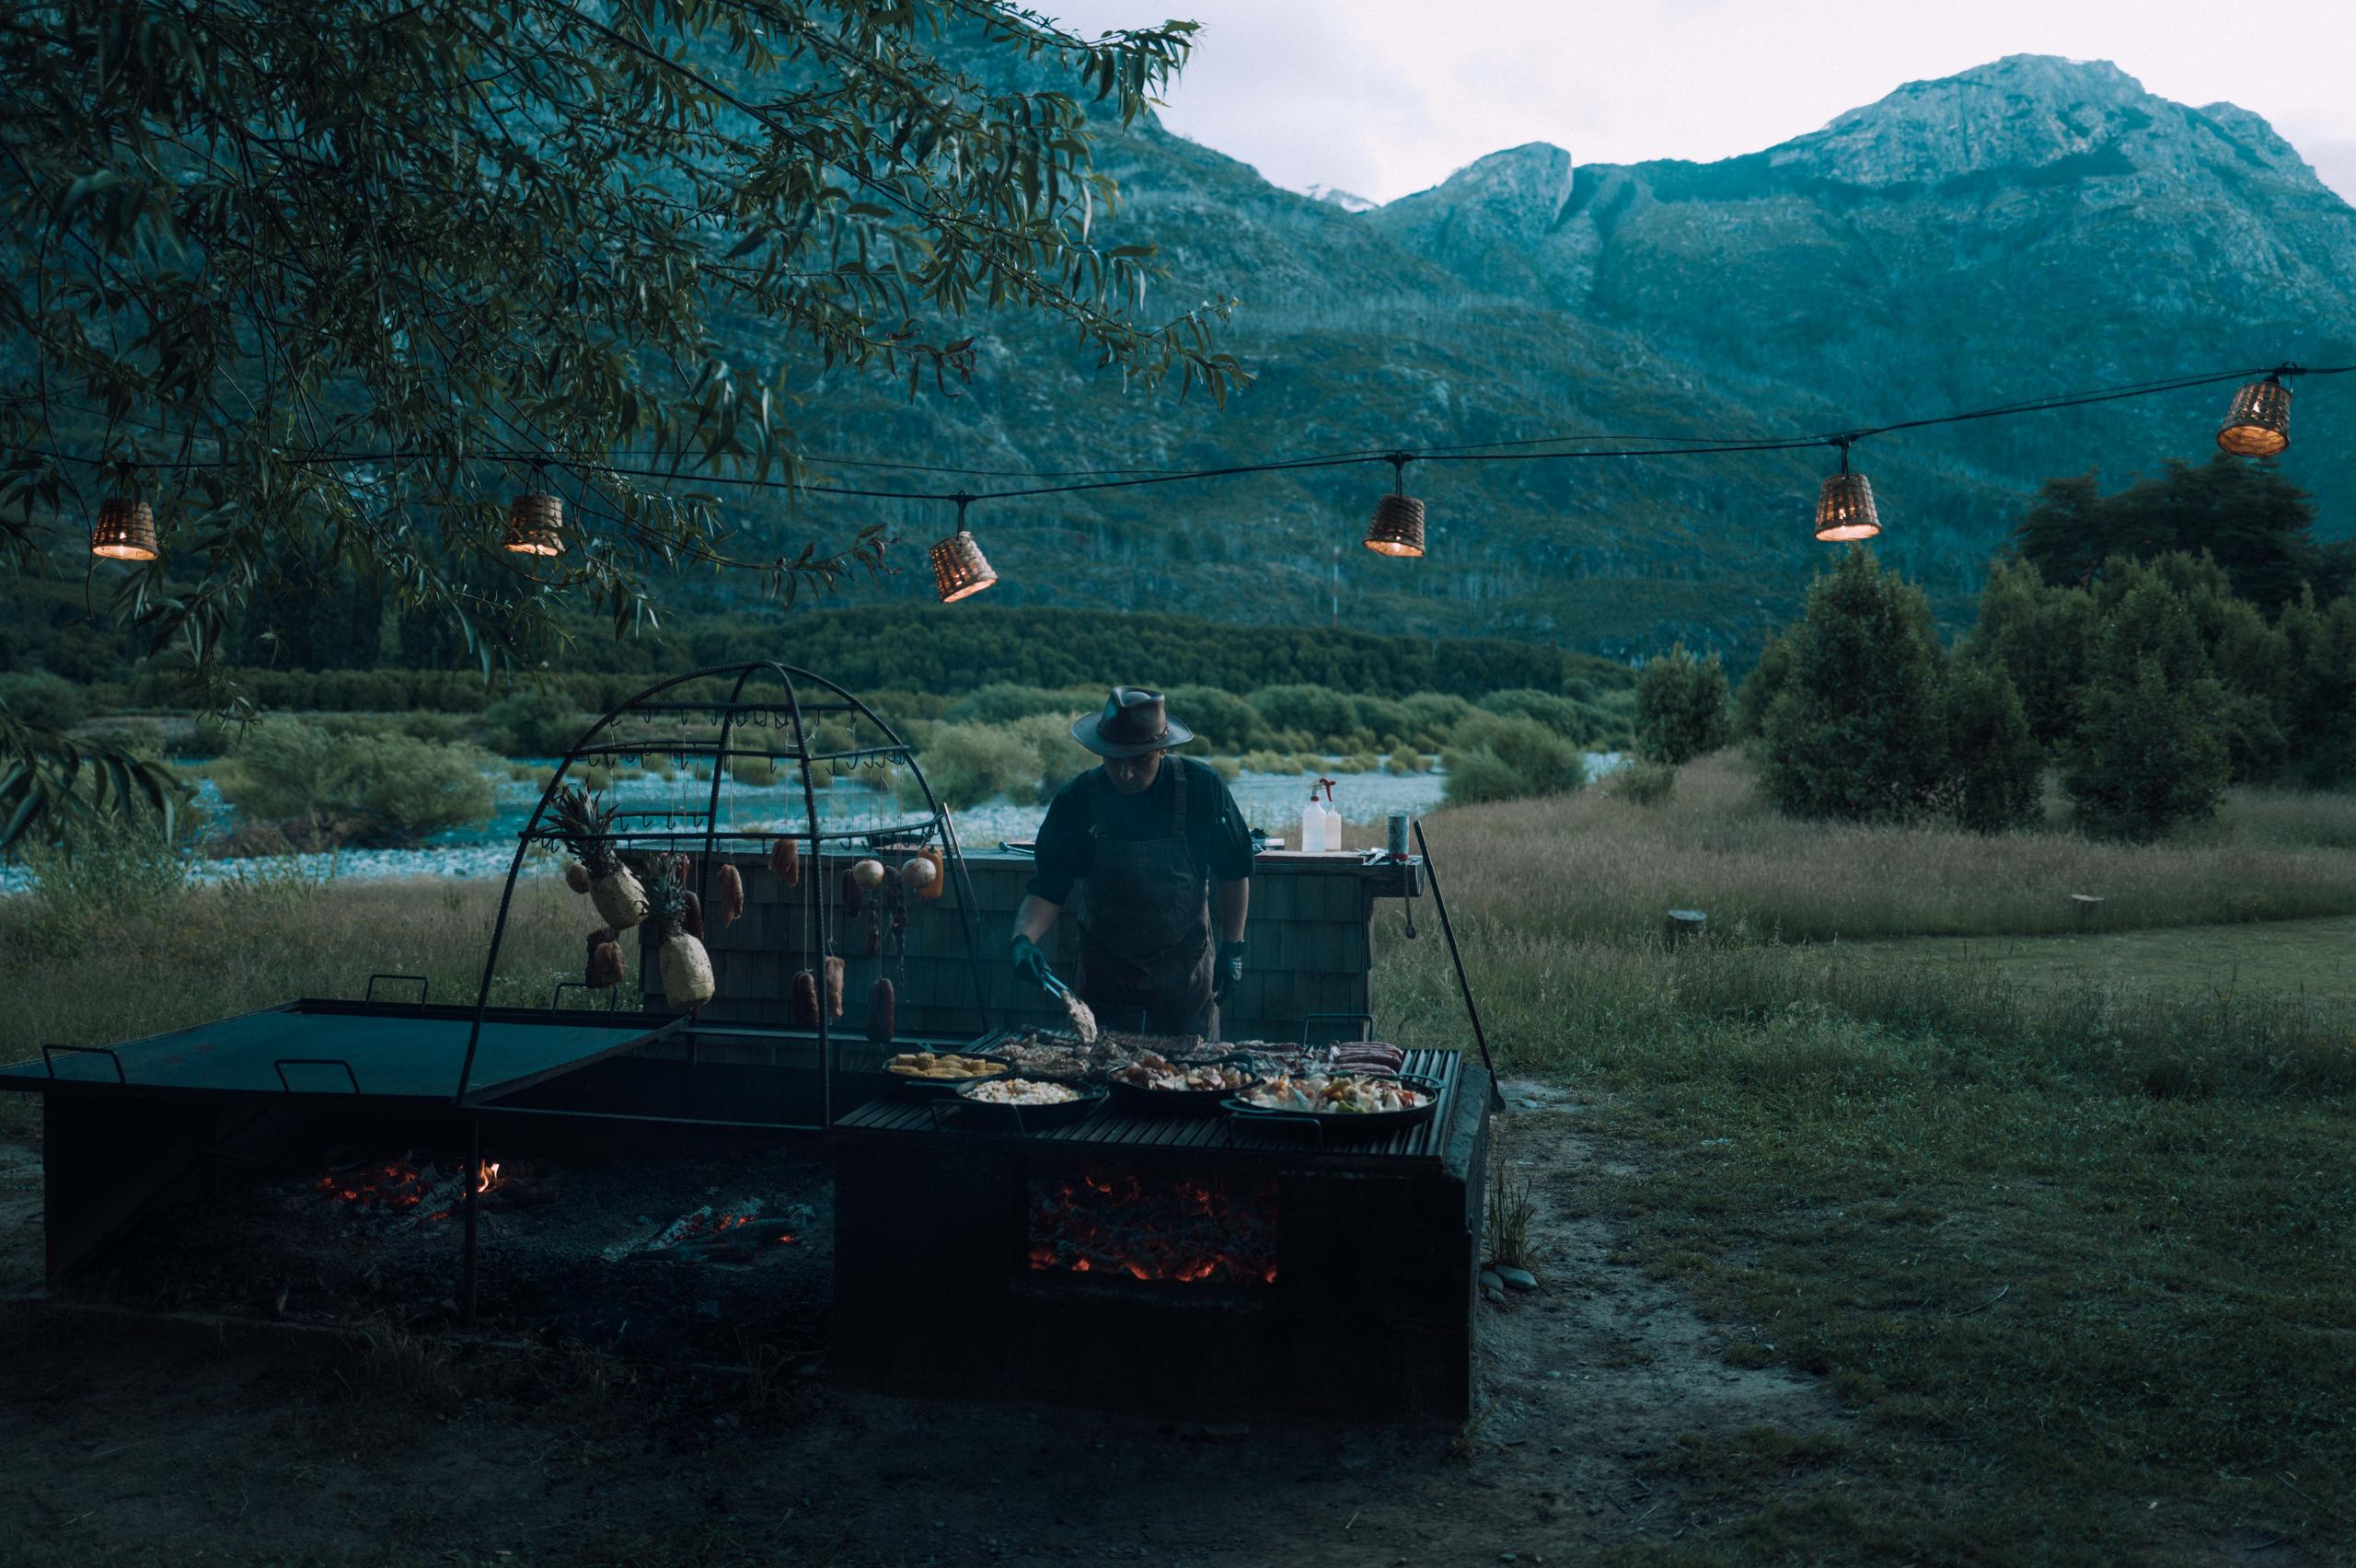 Man cooking on outdoor grill at dusk in front of river in Patagonia